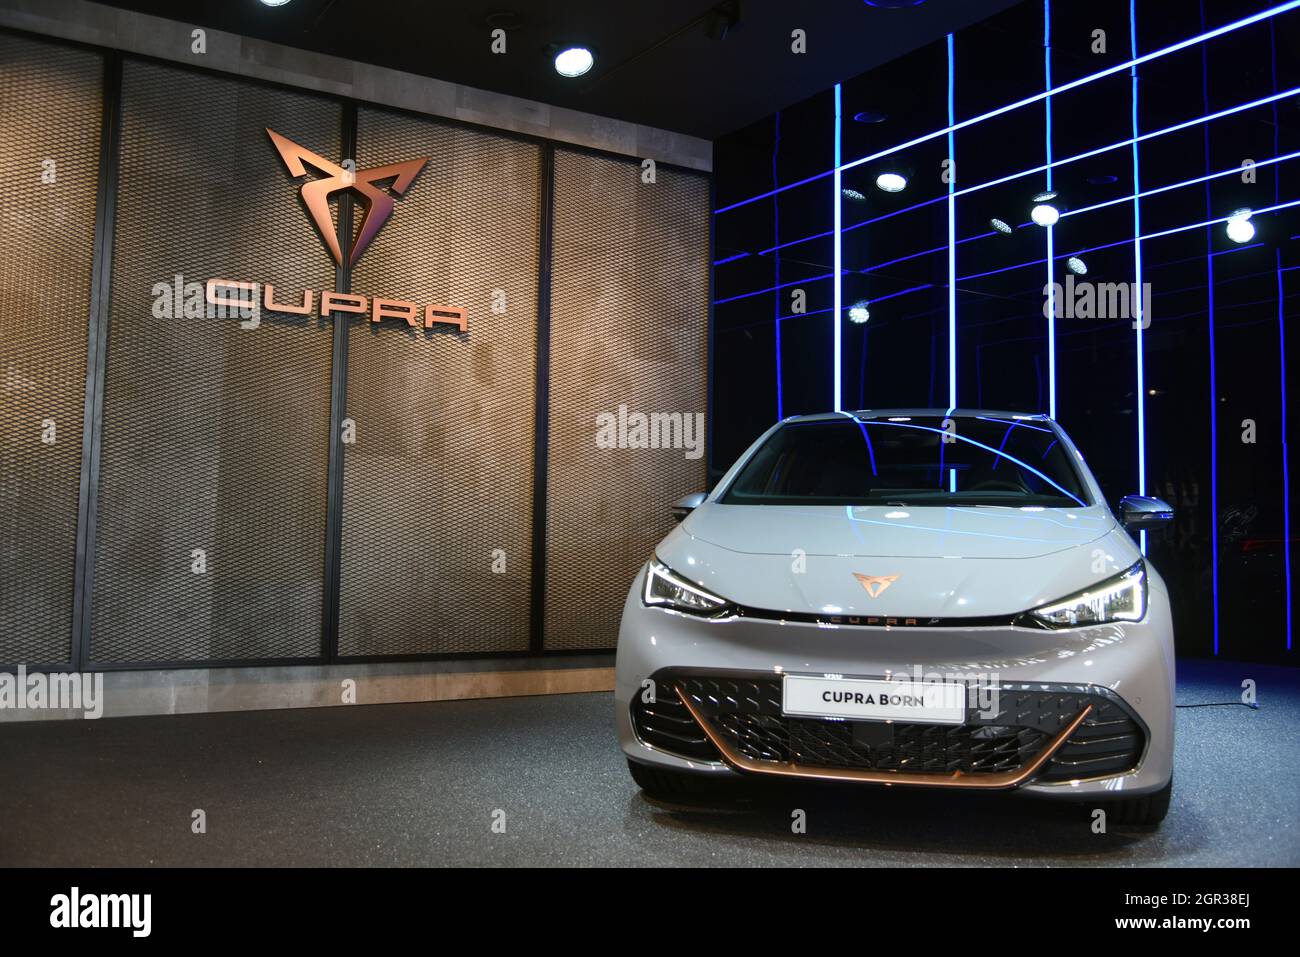 Barcelona, Spain. 30th Sep, 2021. A view of the new Cupra Born electric car. The CEO of the automobile companies Seat and Cupra, Wayne Griffiths,  presents at the Automobile Barcelona, the Cupra Born